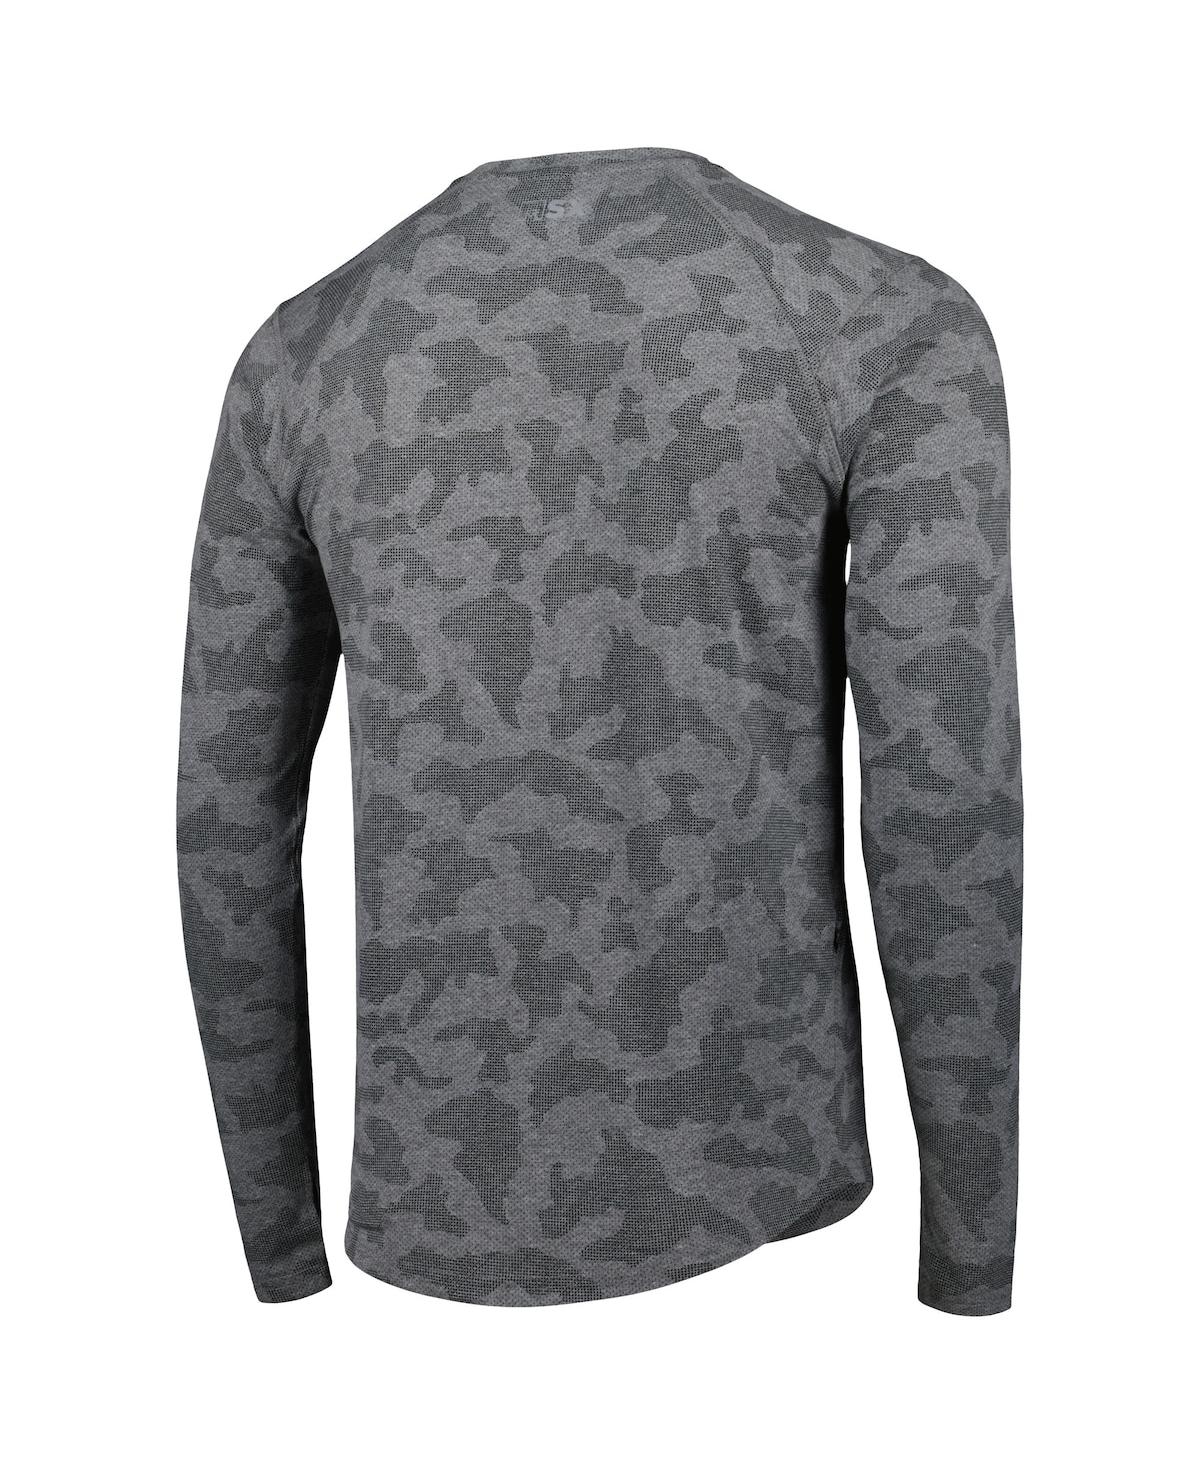 Shop Msx By Michael Strahan Men's  Gray Tampa Bay Buccaneers Performance Camo Long Sleeve T-shirt